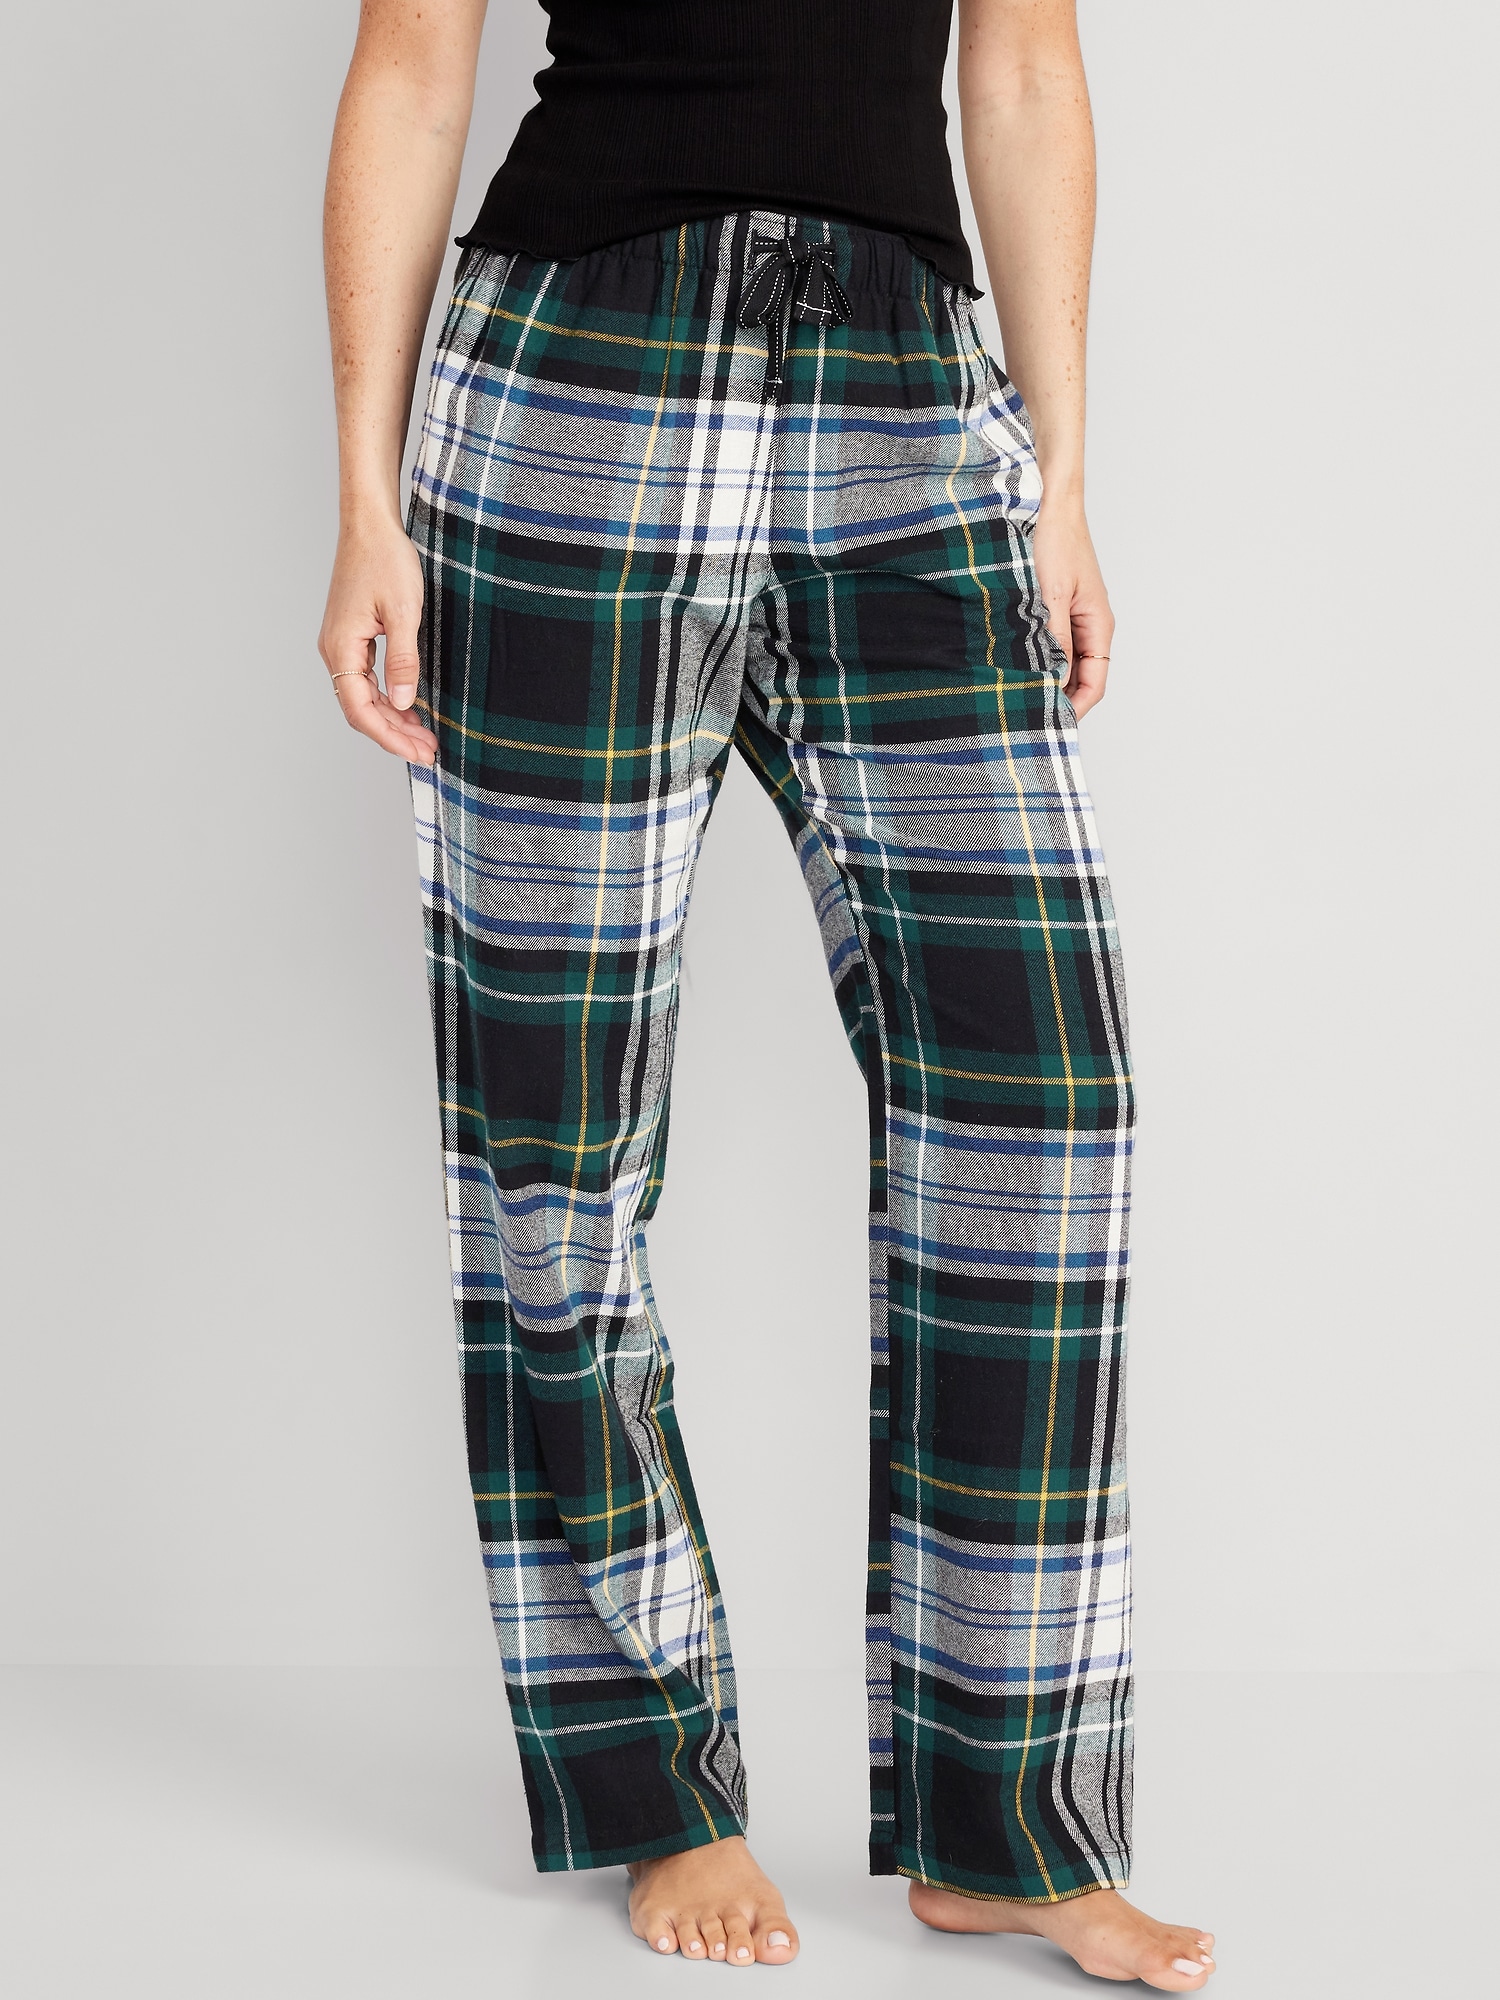 Best Holiday Pajama Bottoms at Old Navy